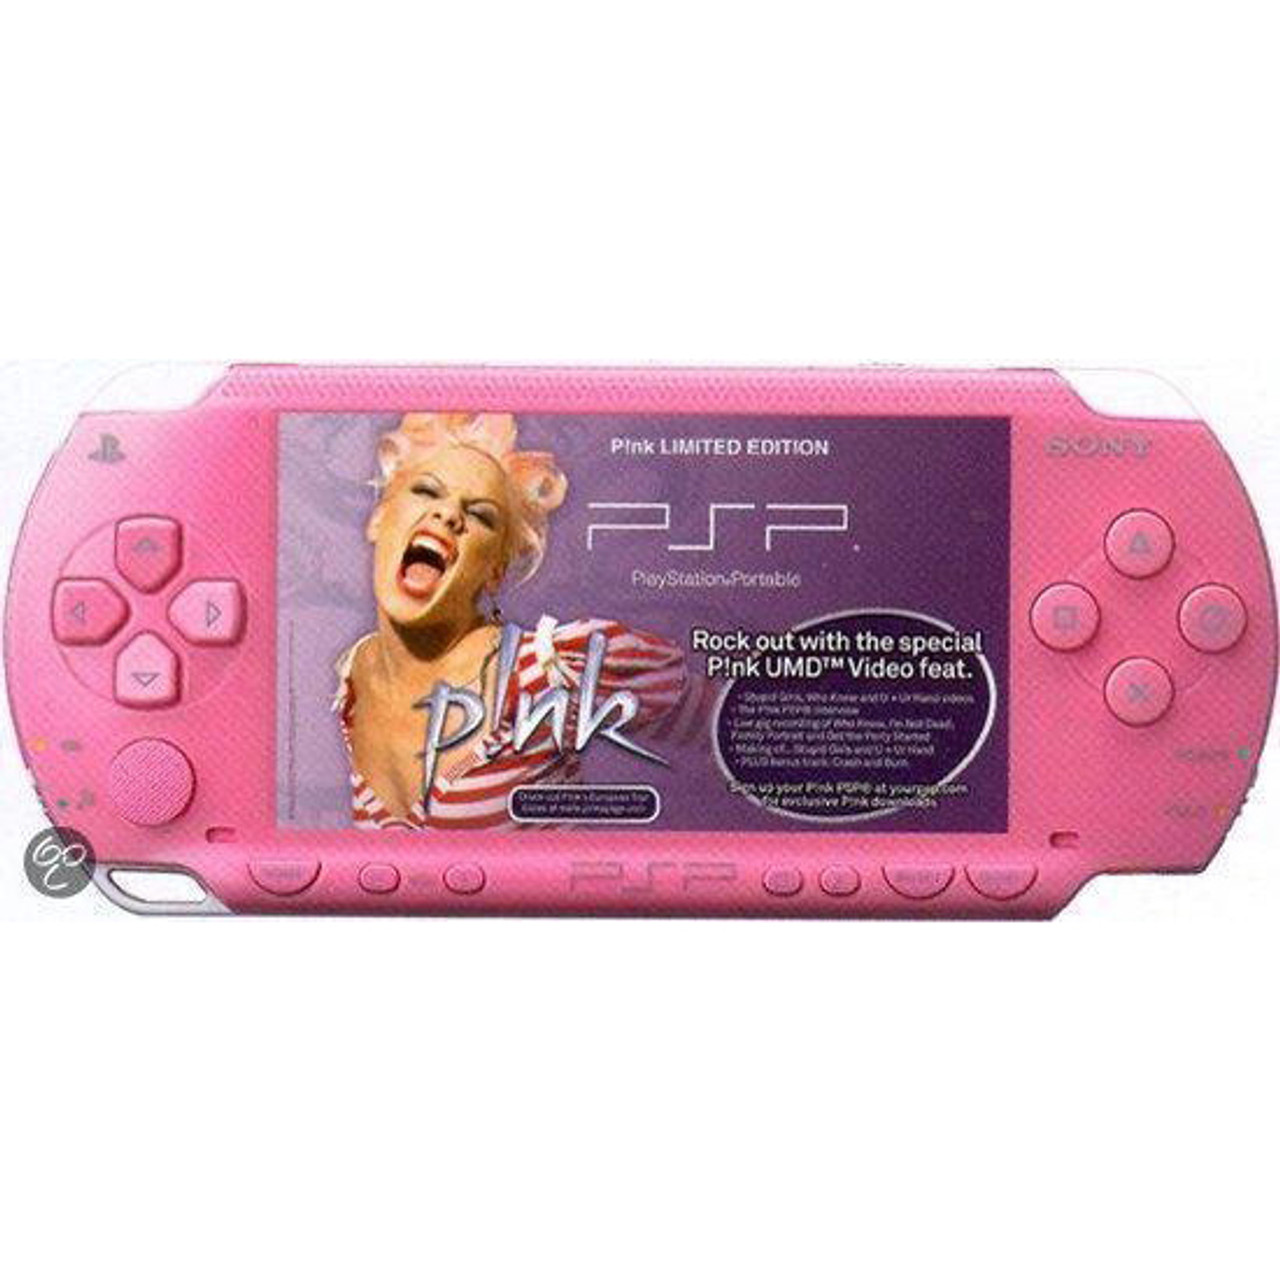 Sony PSP 1000 Handheld System P!nk Limited Edition With Charger